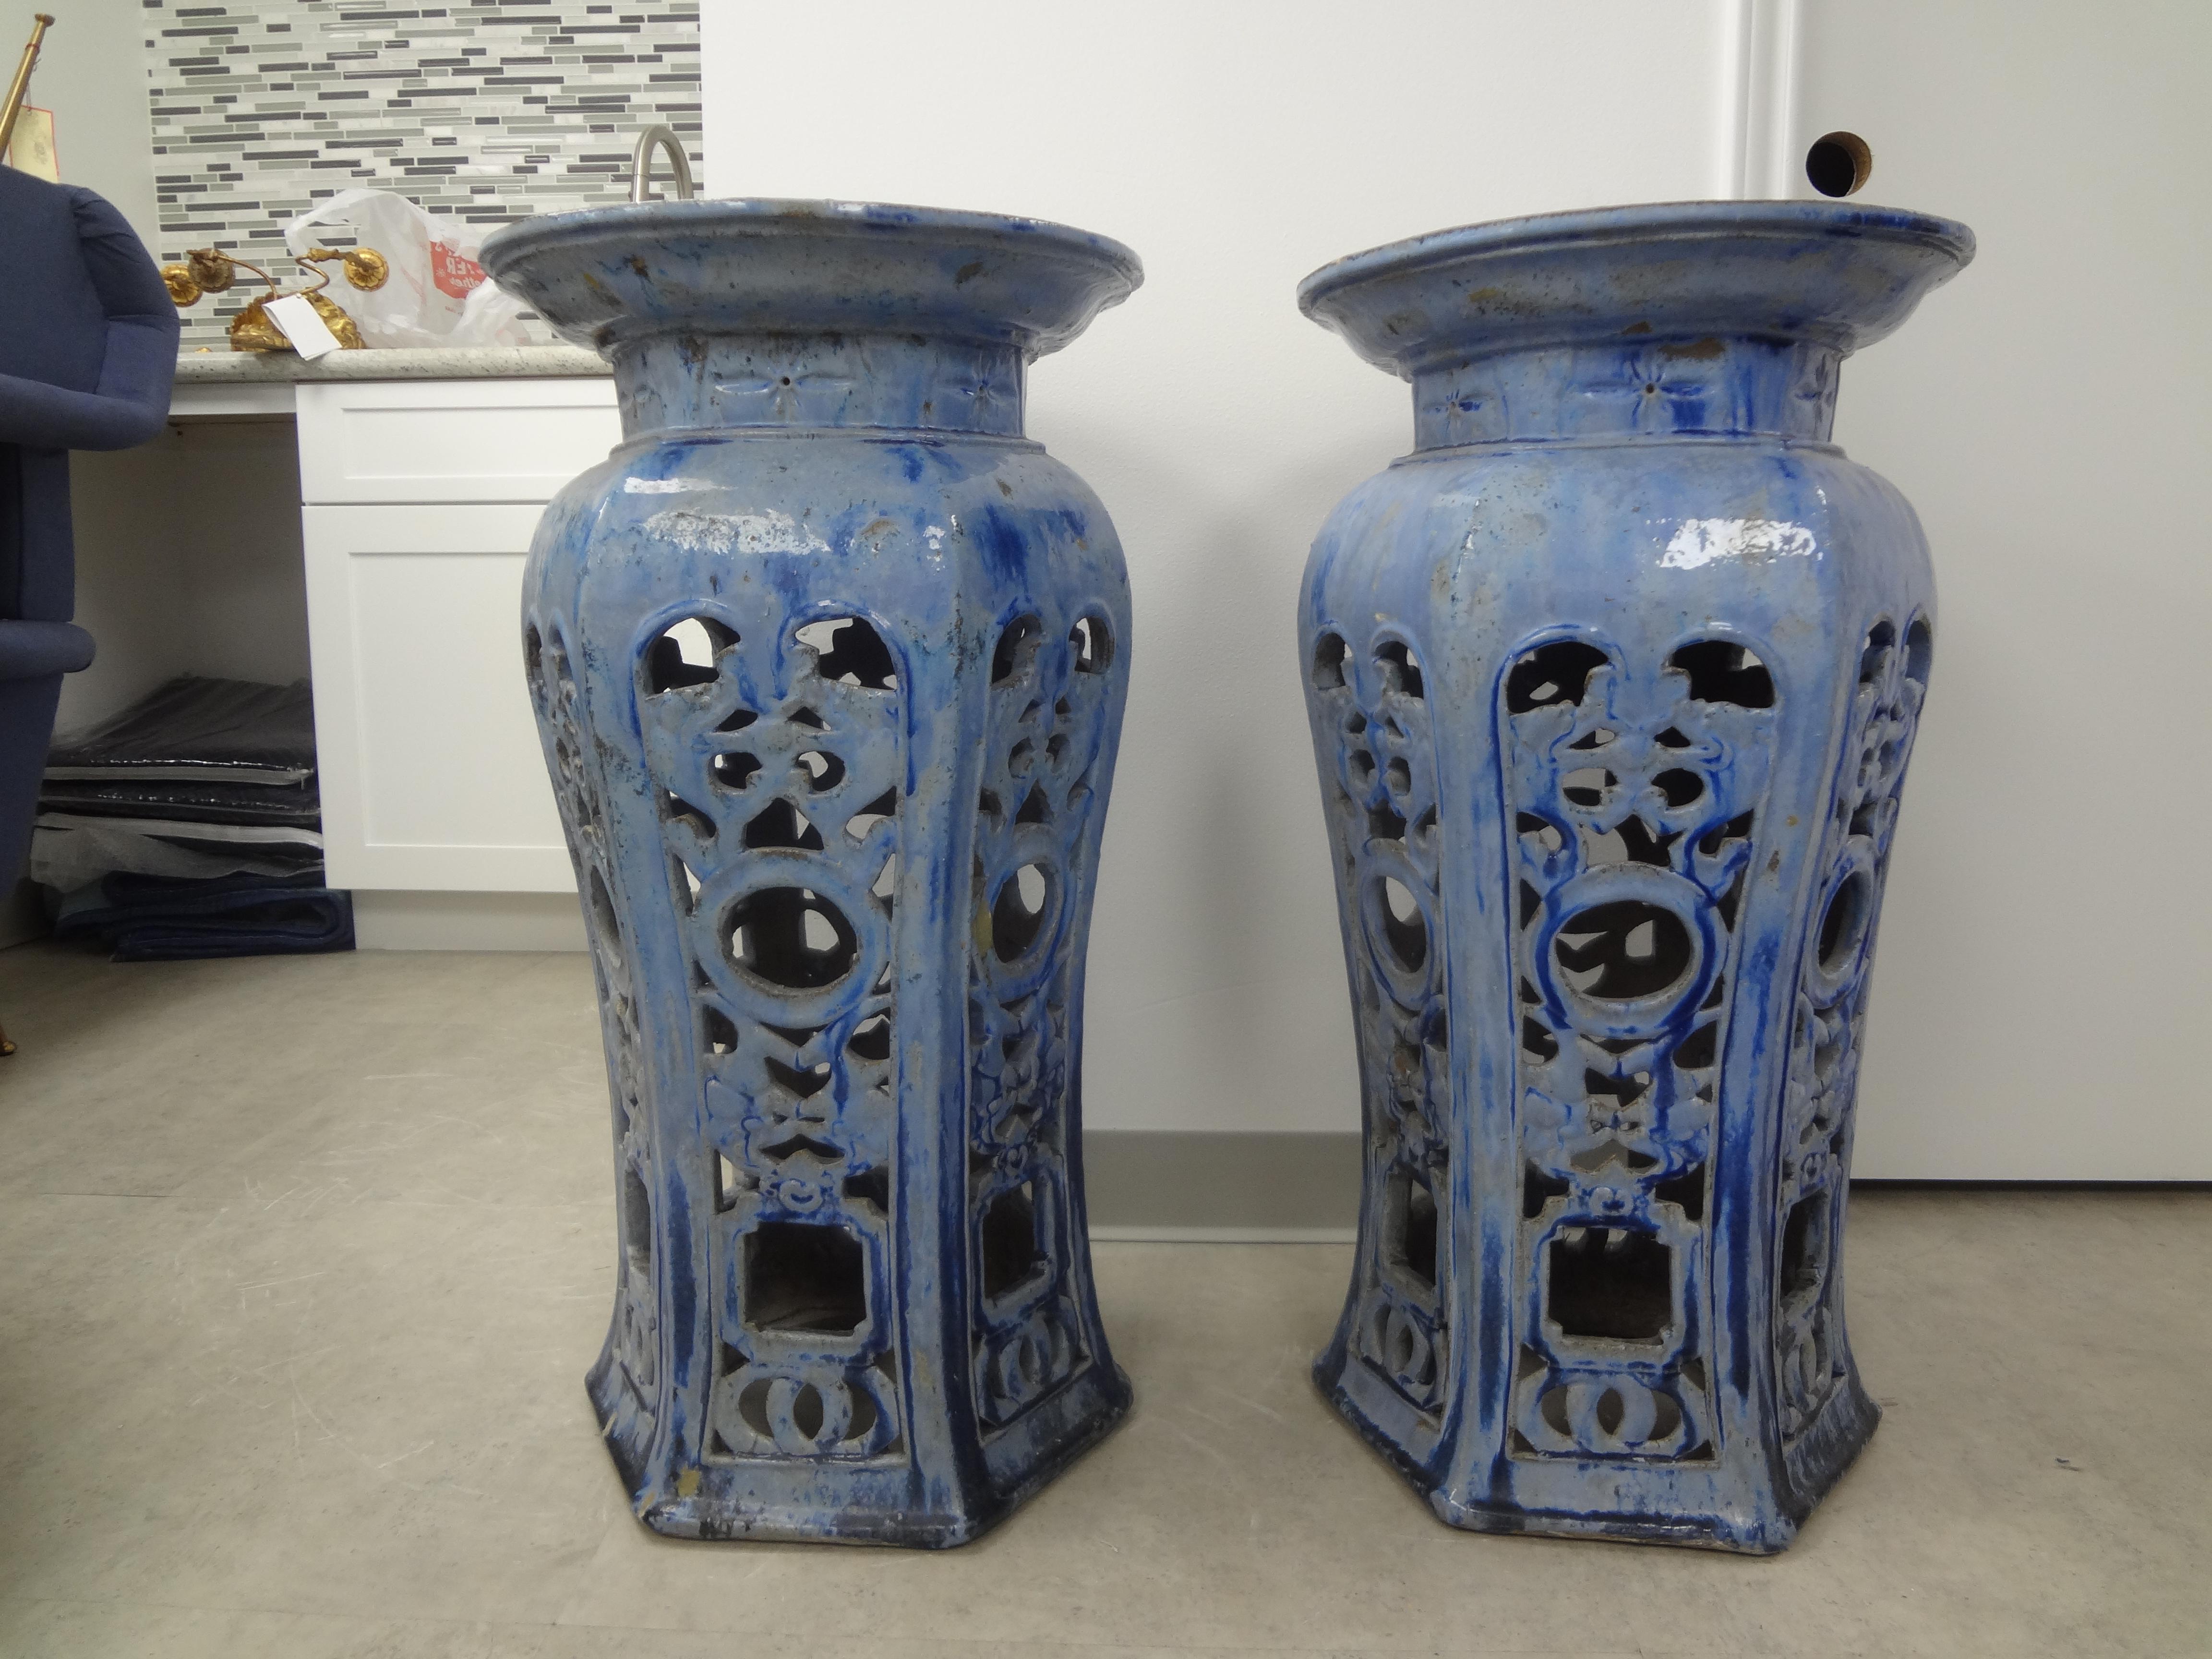 Terracotta Pair of Early 20th Century Chinese Glazed Terra Cotta Pedestals or Stands For Sale